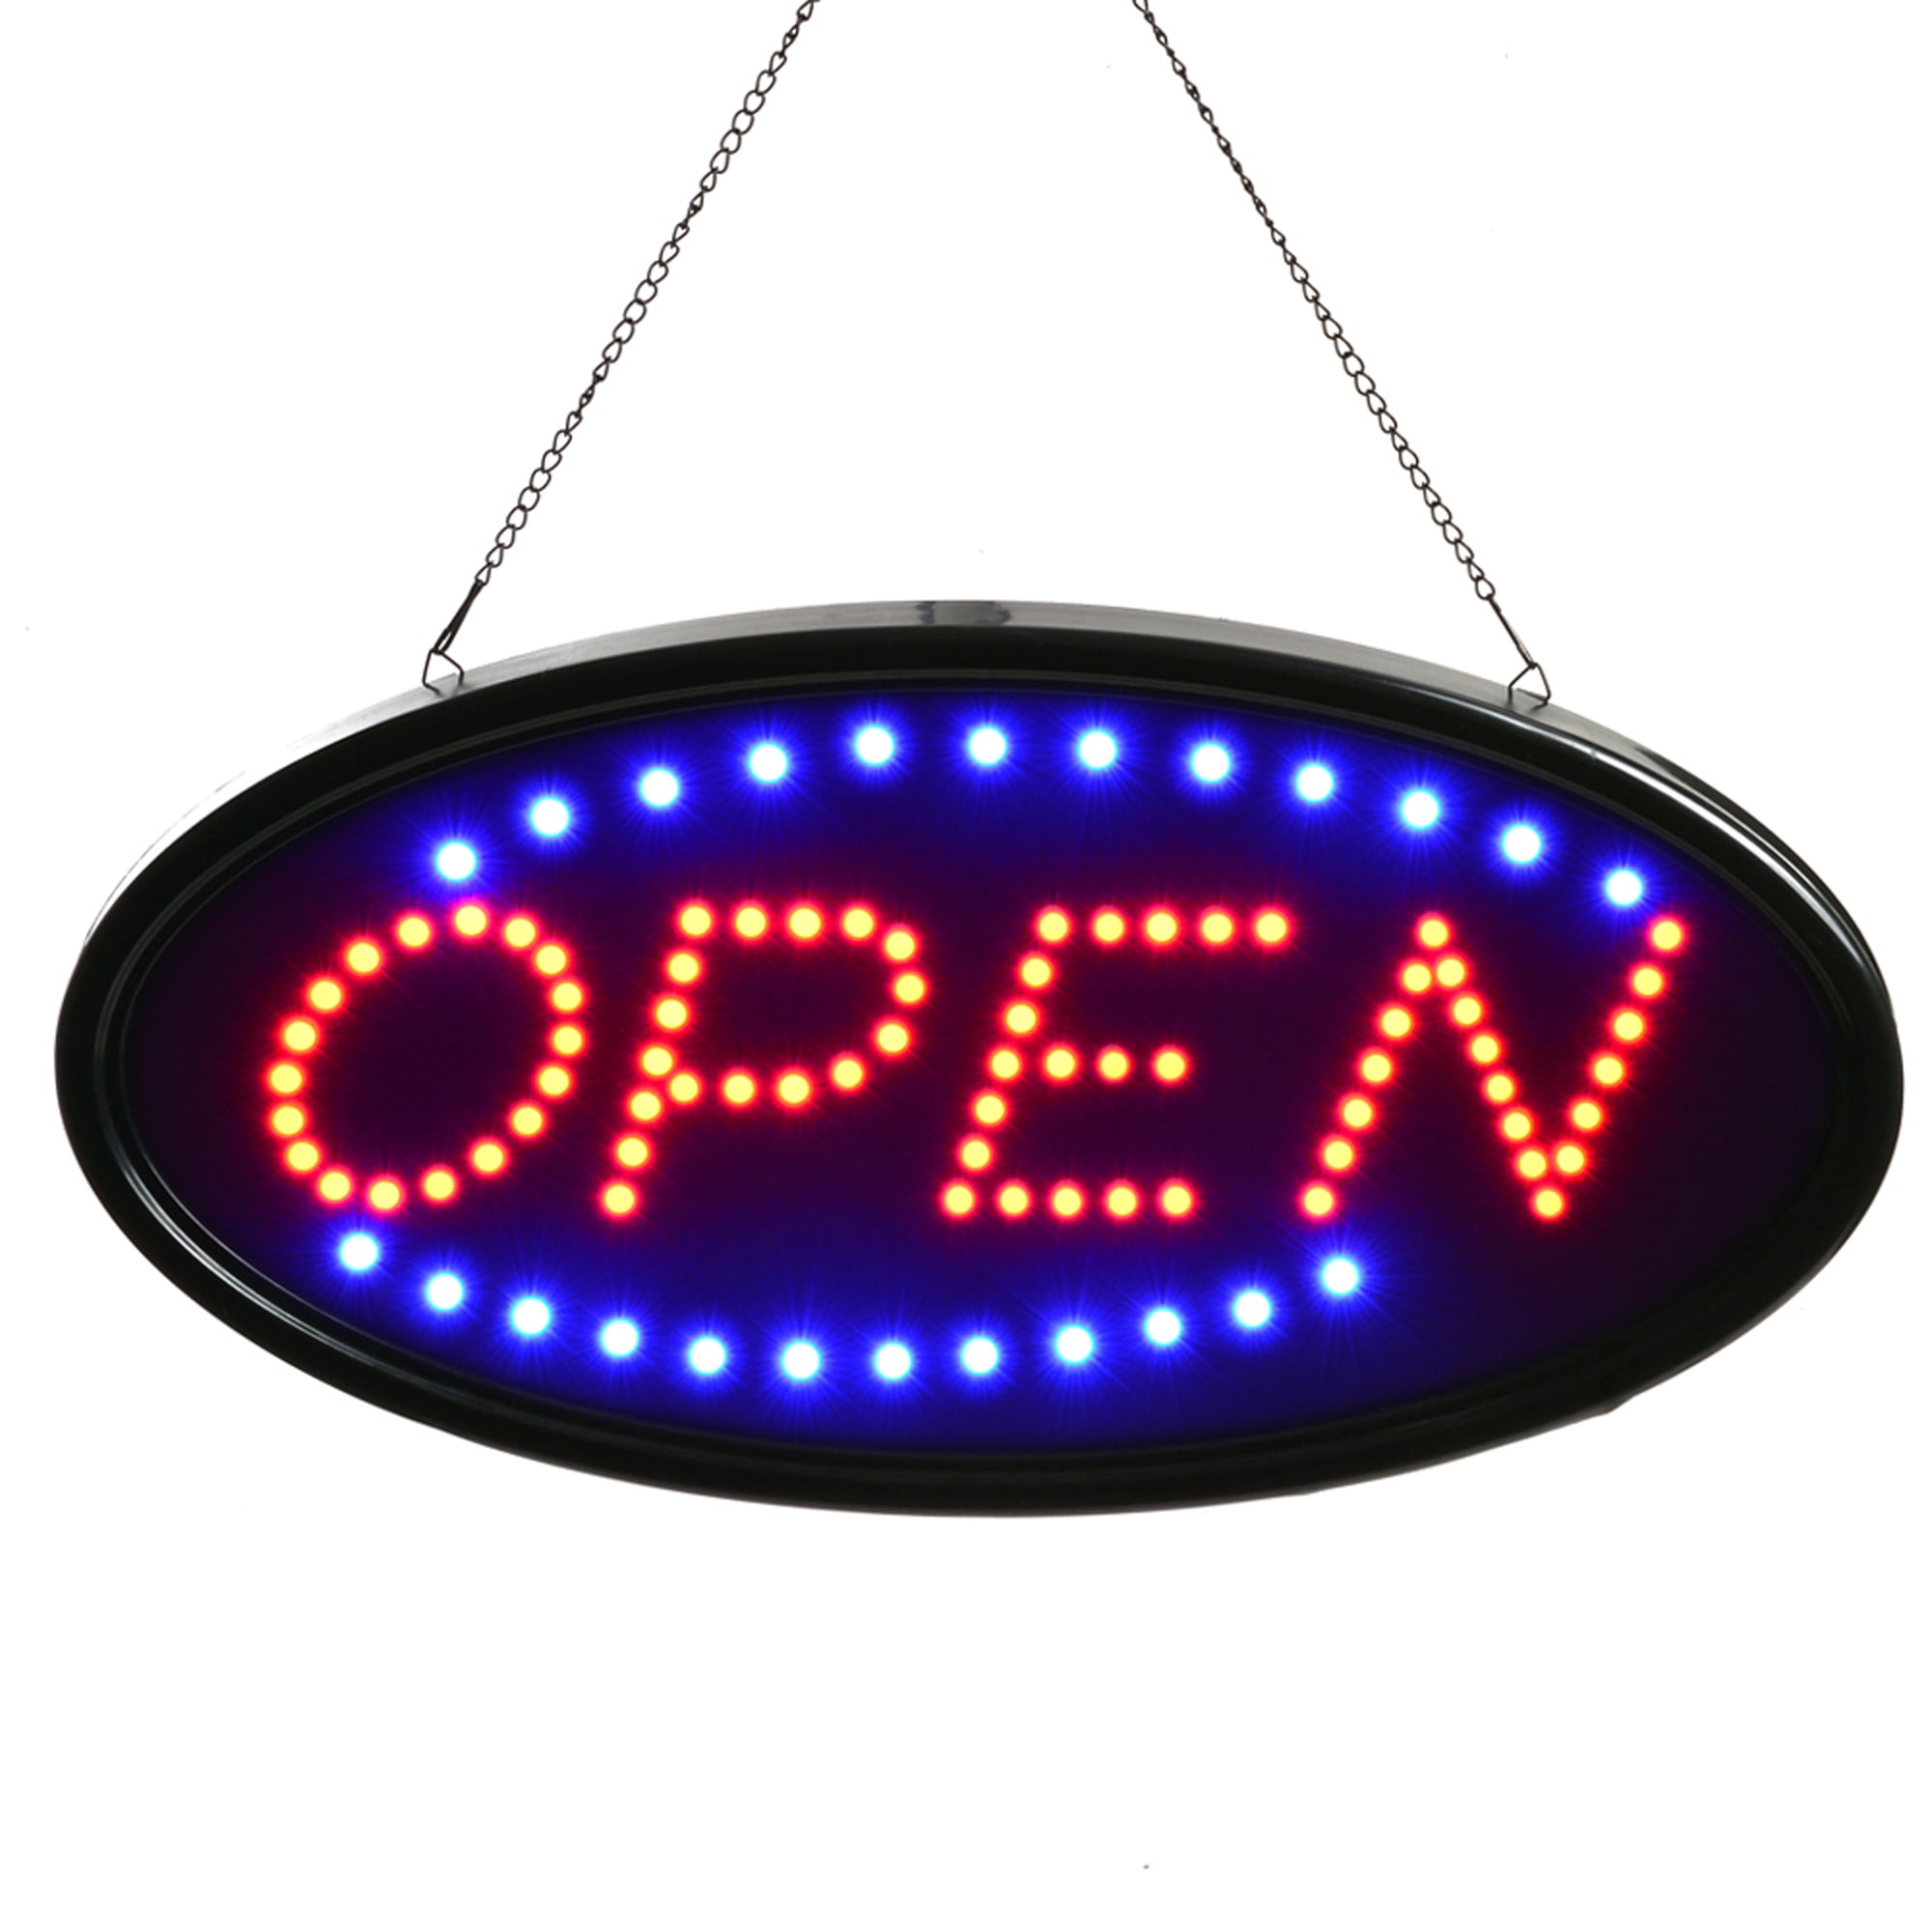 Flashing open with smiling face led new window sign 